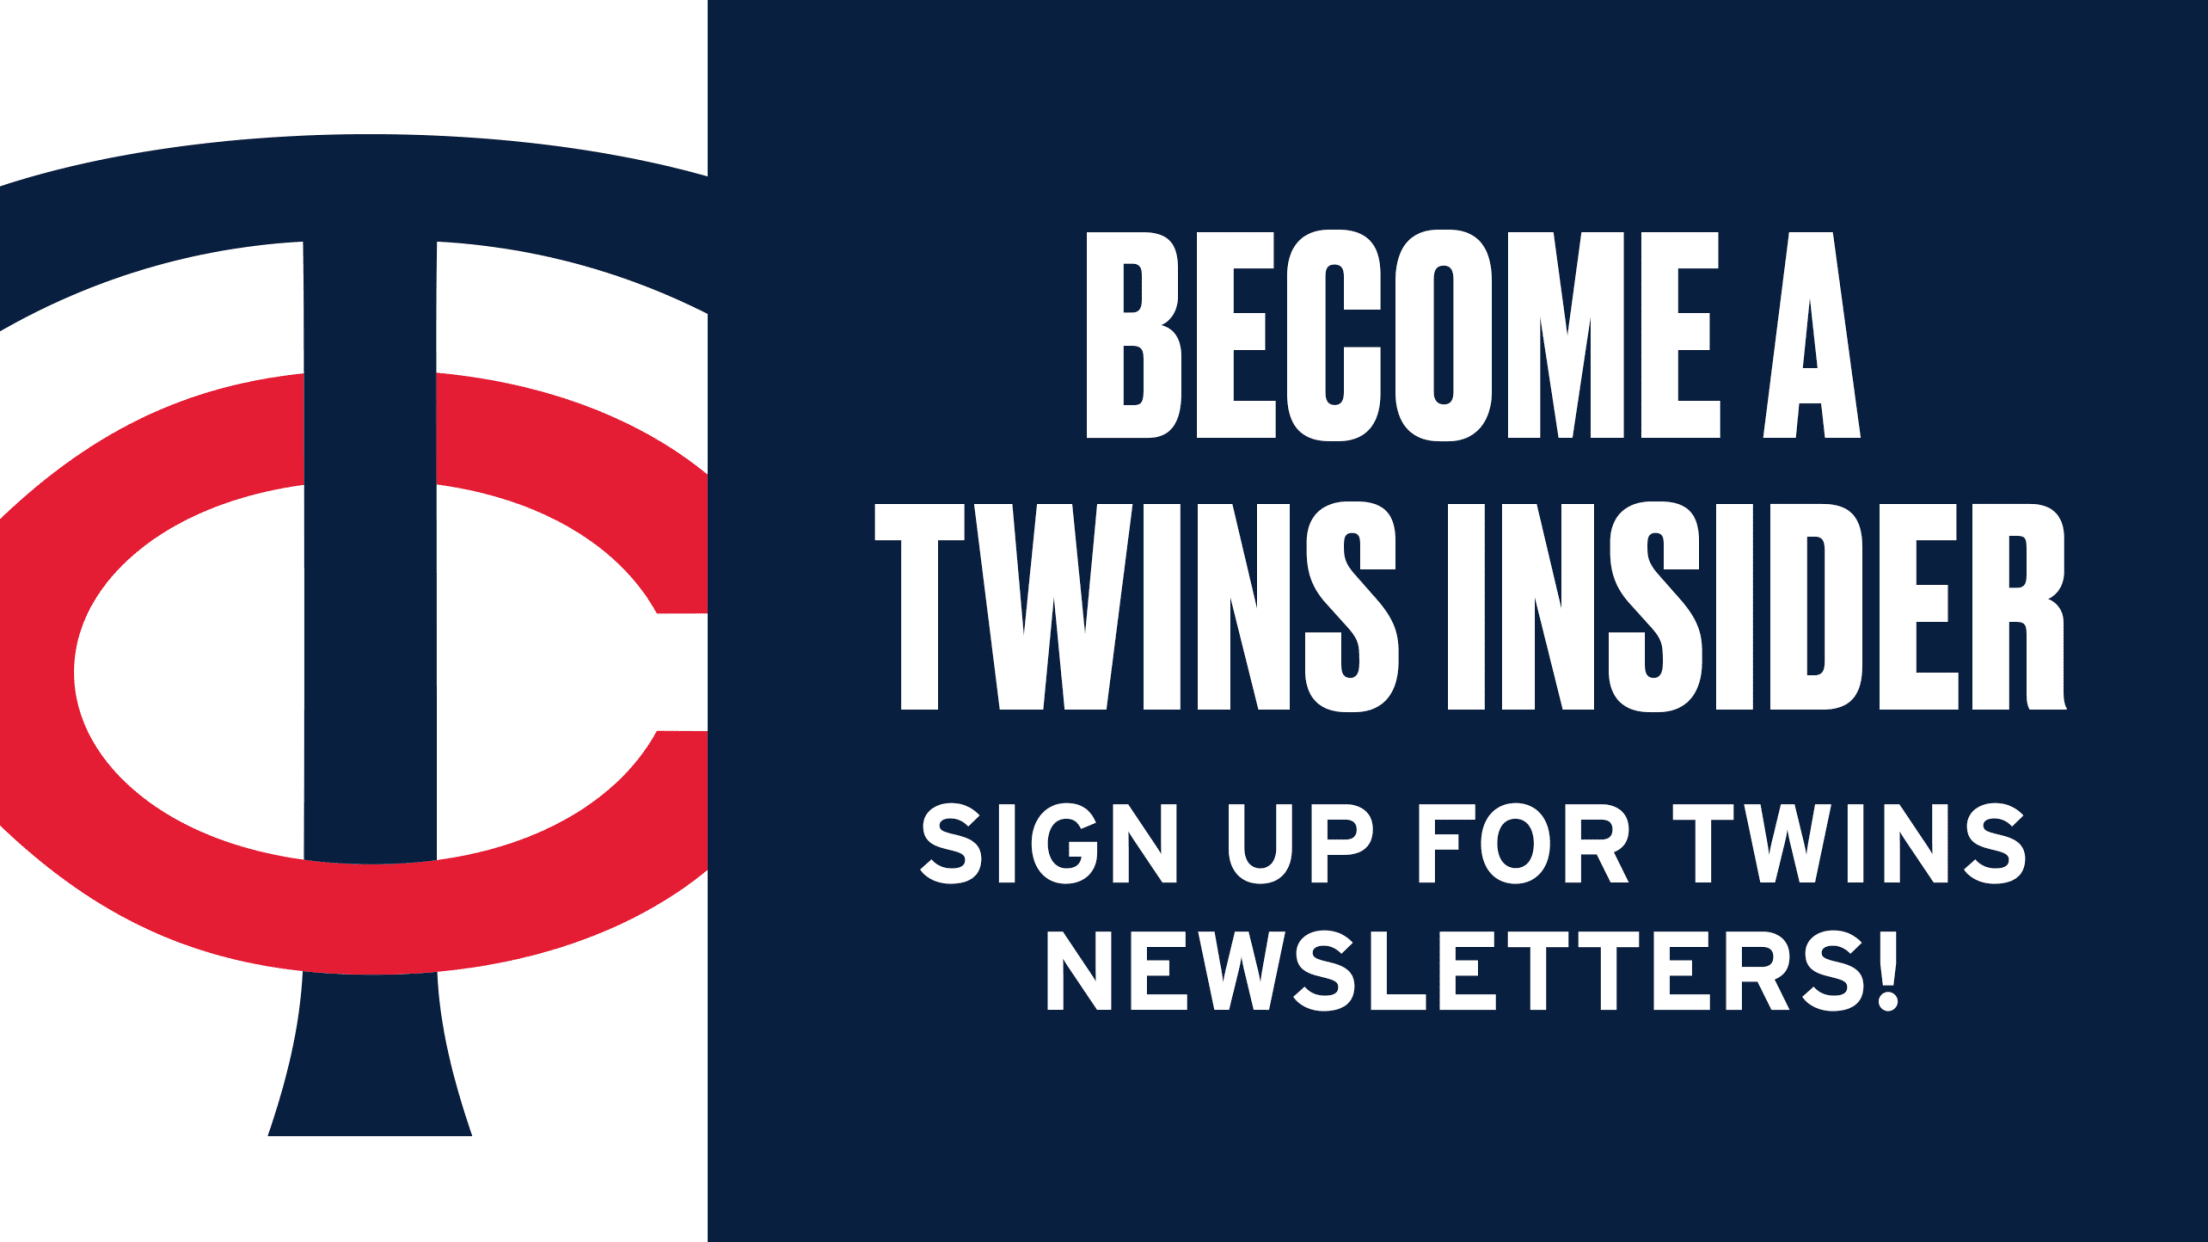 Minnesota Twins - The Ultimate Twins Experience is happening now. ⚾🌭 Enter  online  or text UltimateTwins to 73876 for a chance  to win! Follow the Sheboygan Sausage Company for more details.